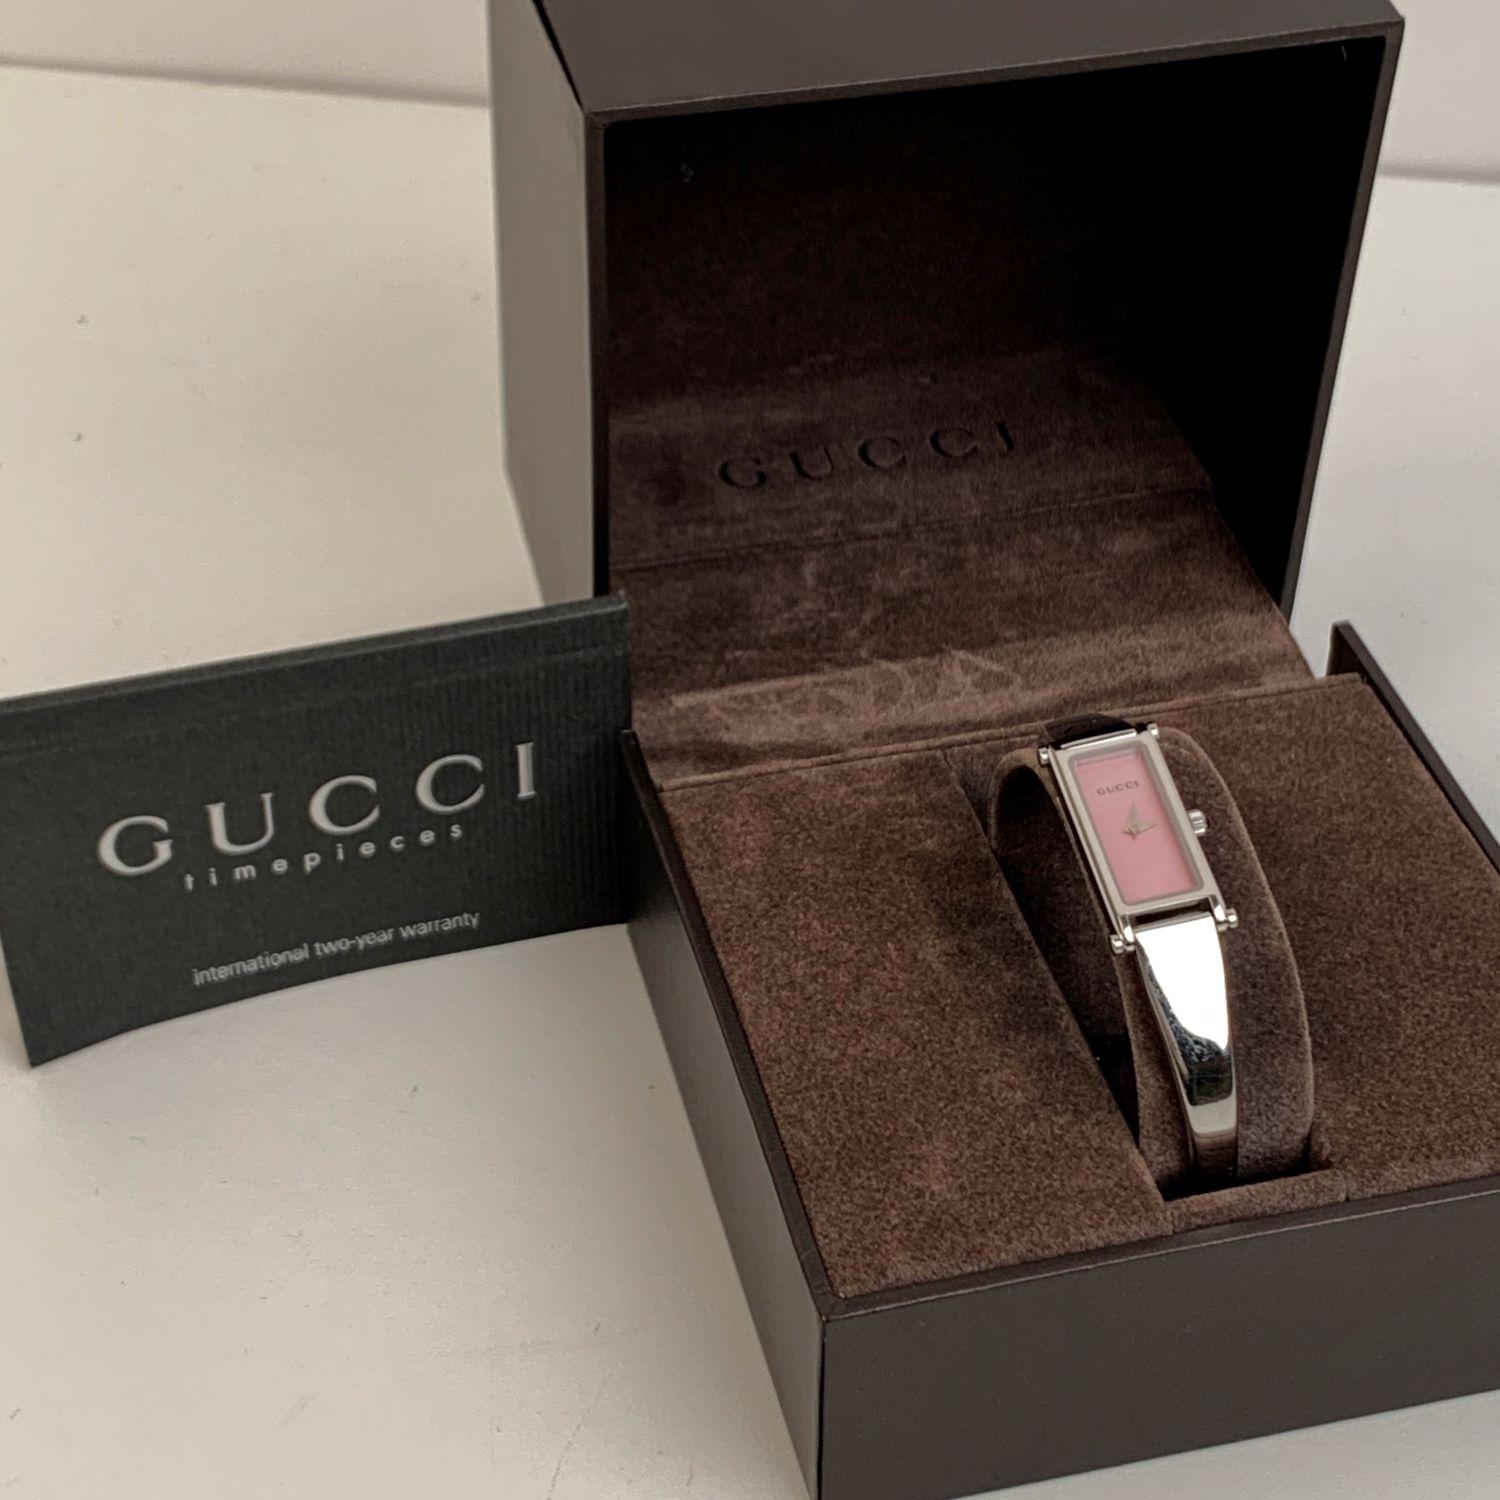 Vintage, 1990s Gucci stainless steel ladies wrist watch. Model 1500L. Stainless steel case. Quartz movement. Water Resistant (up to 3 ATM). Mother of pearl pink dial. Swiss Made. Gucci written on the face, clasp & reverse. Clasp with snap closure